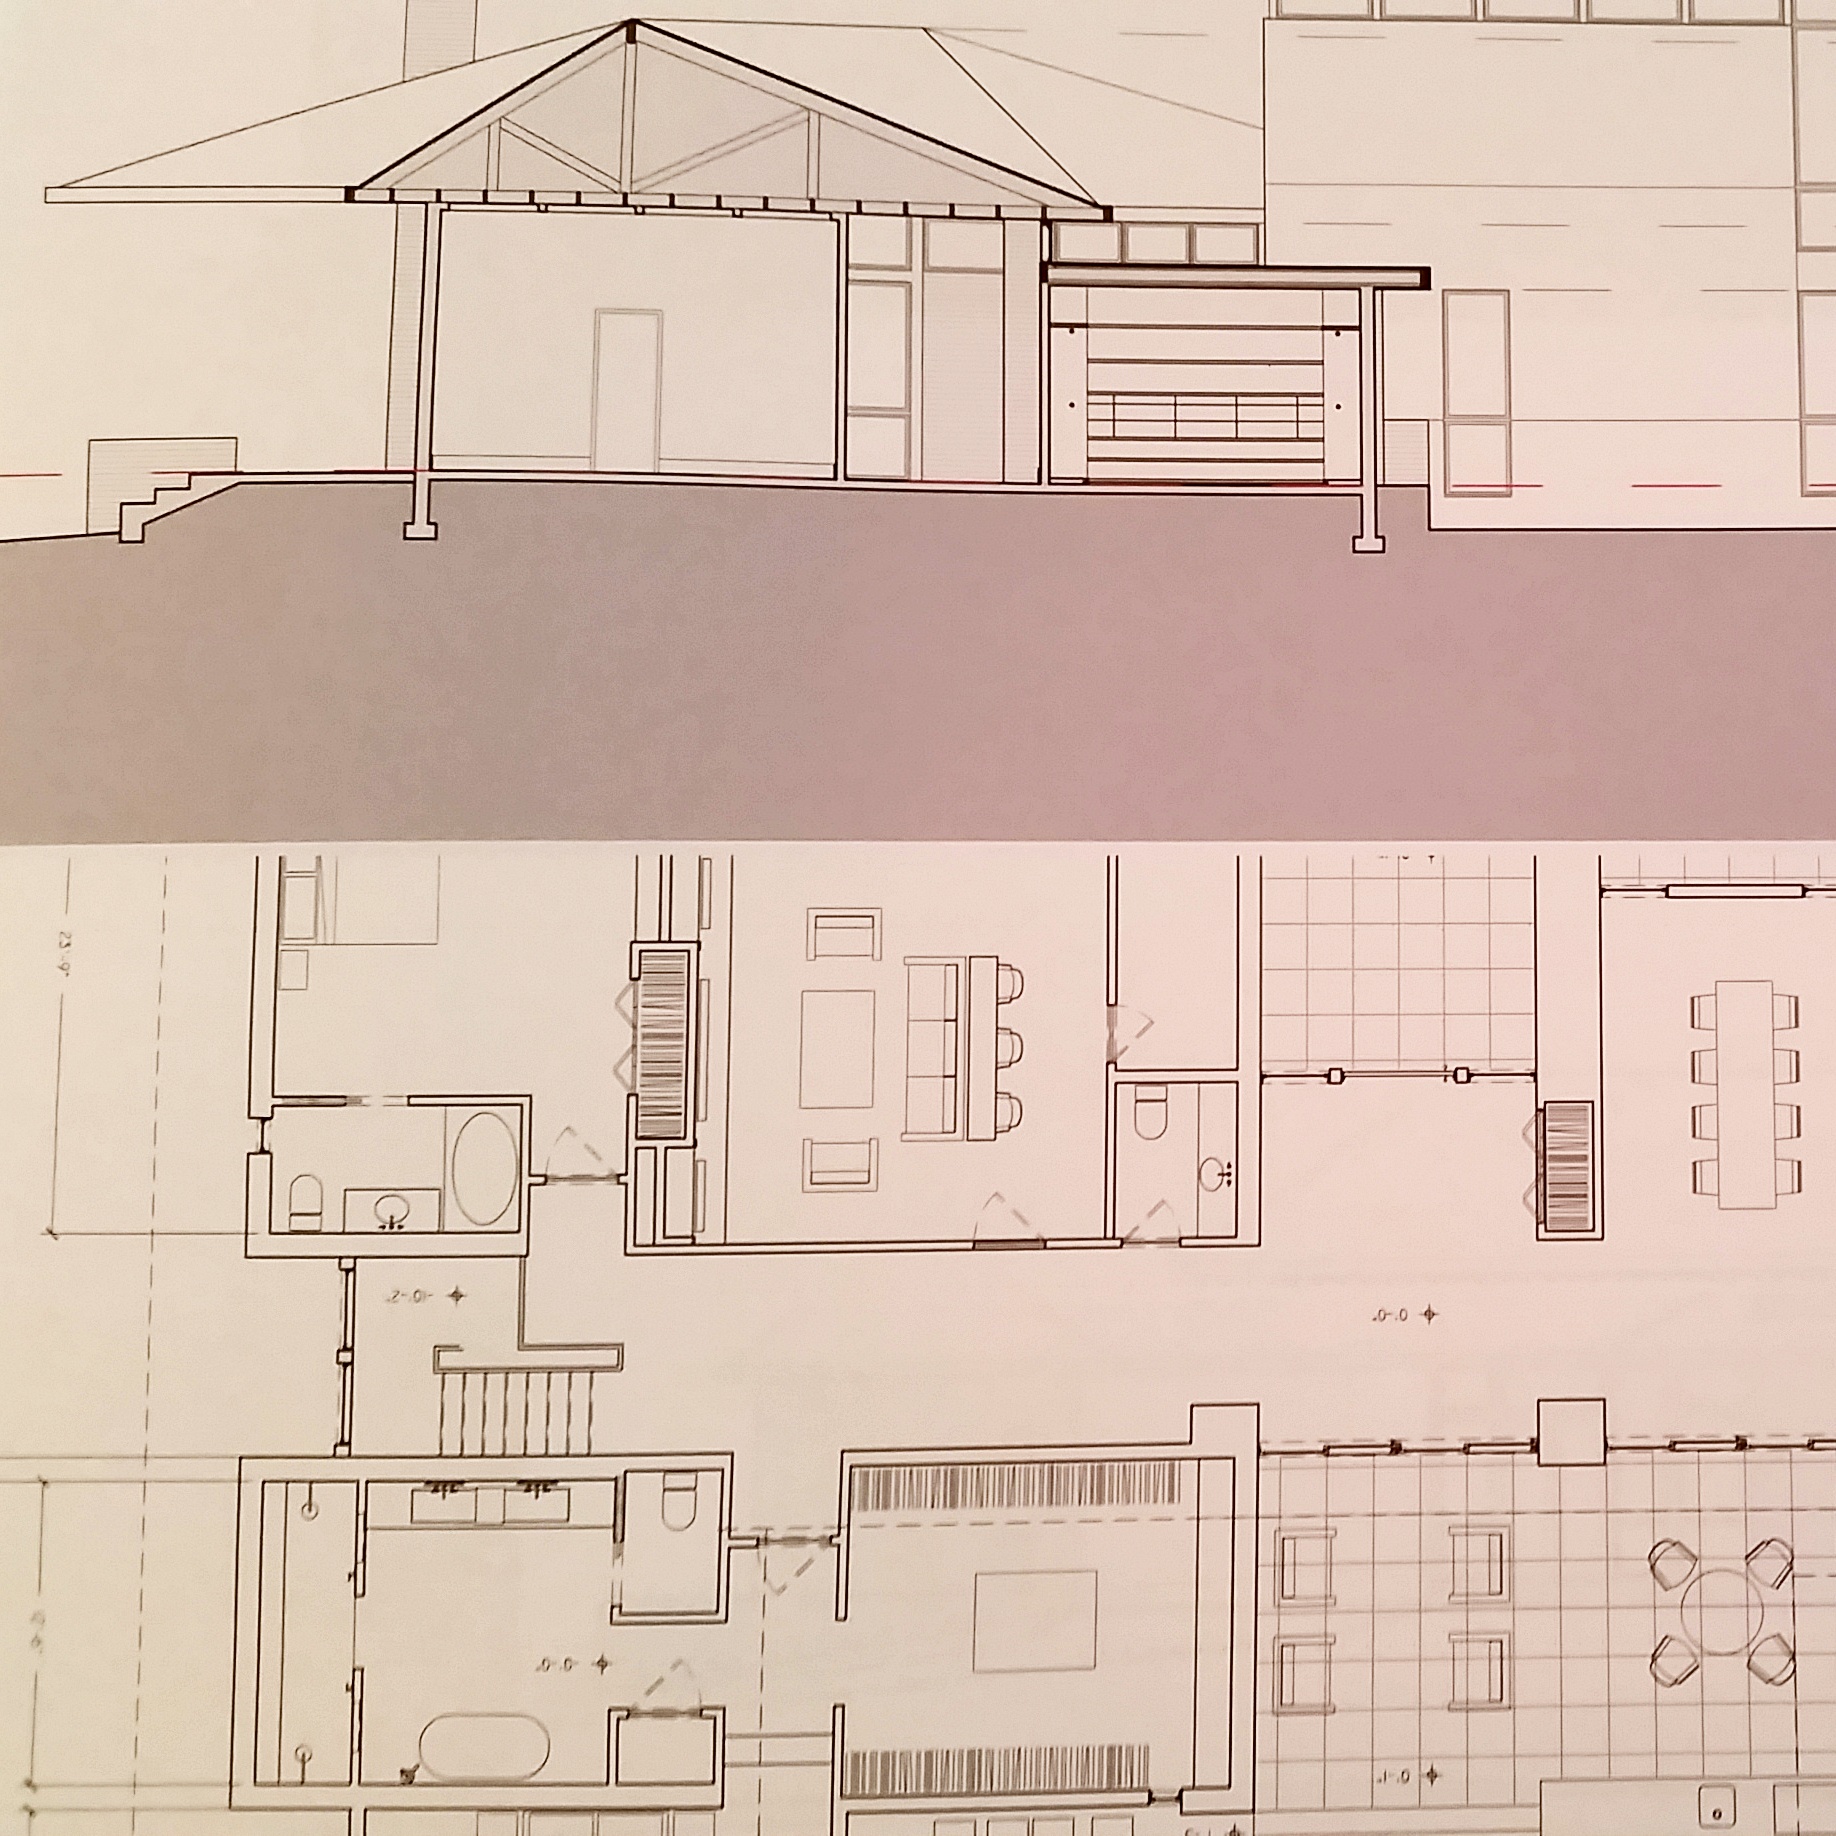 What To Expect from Your Architect: Design Drawings and Coordinating with the Contractor